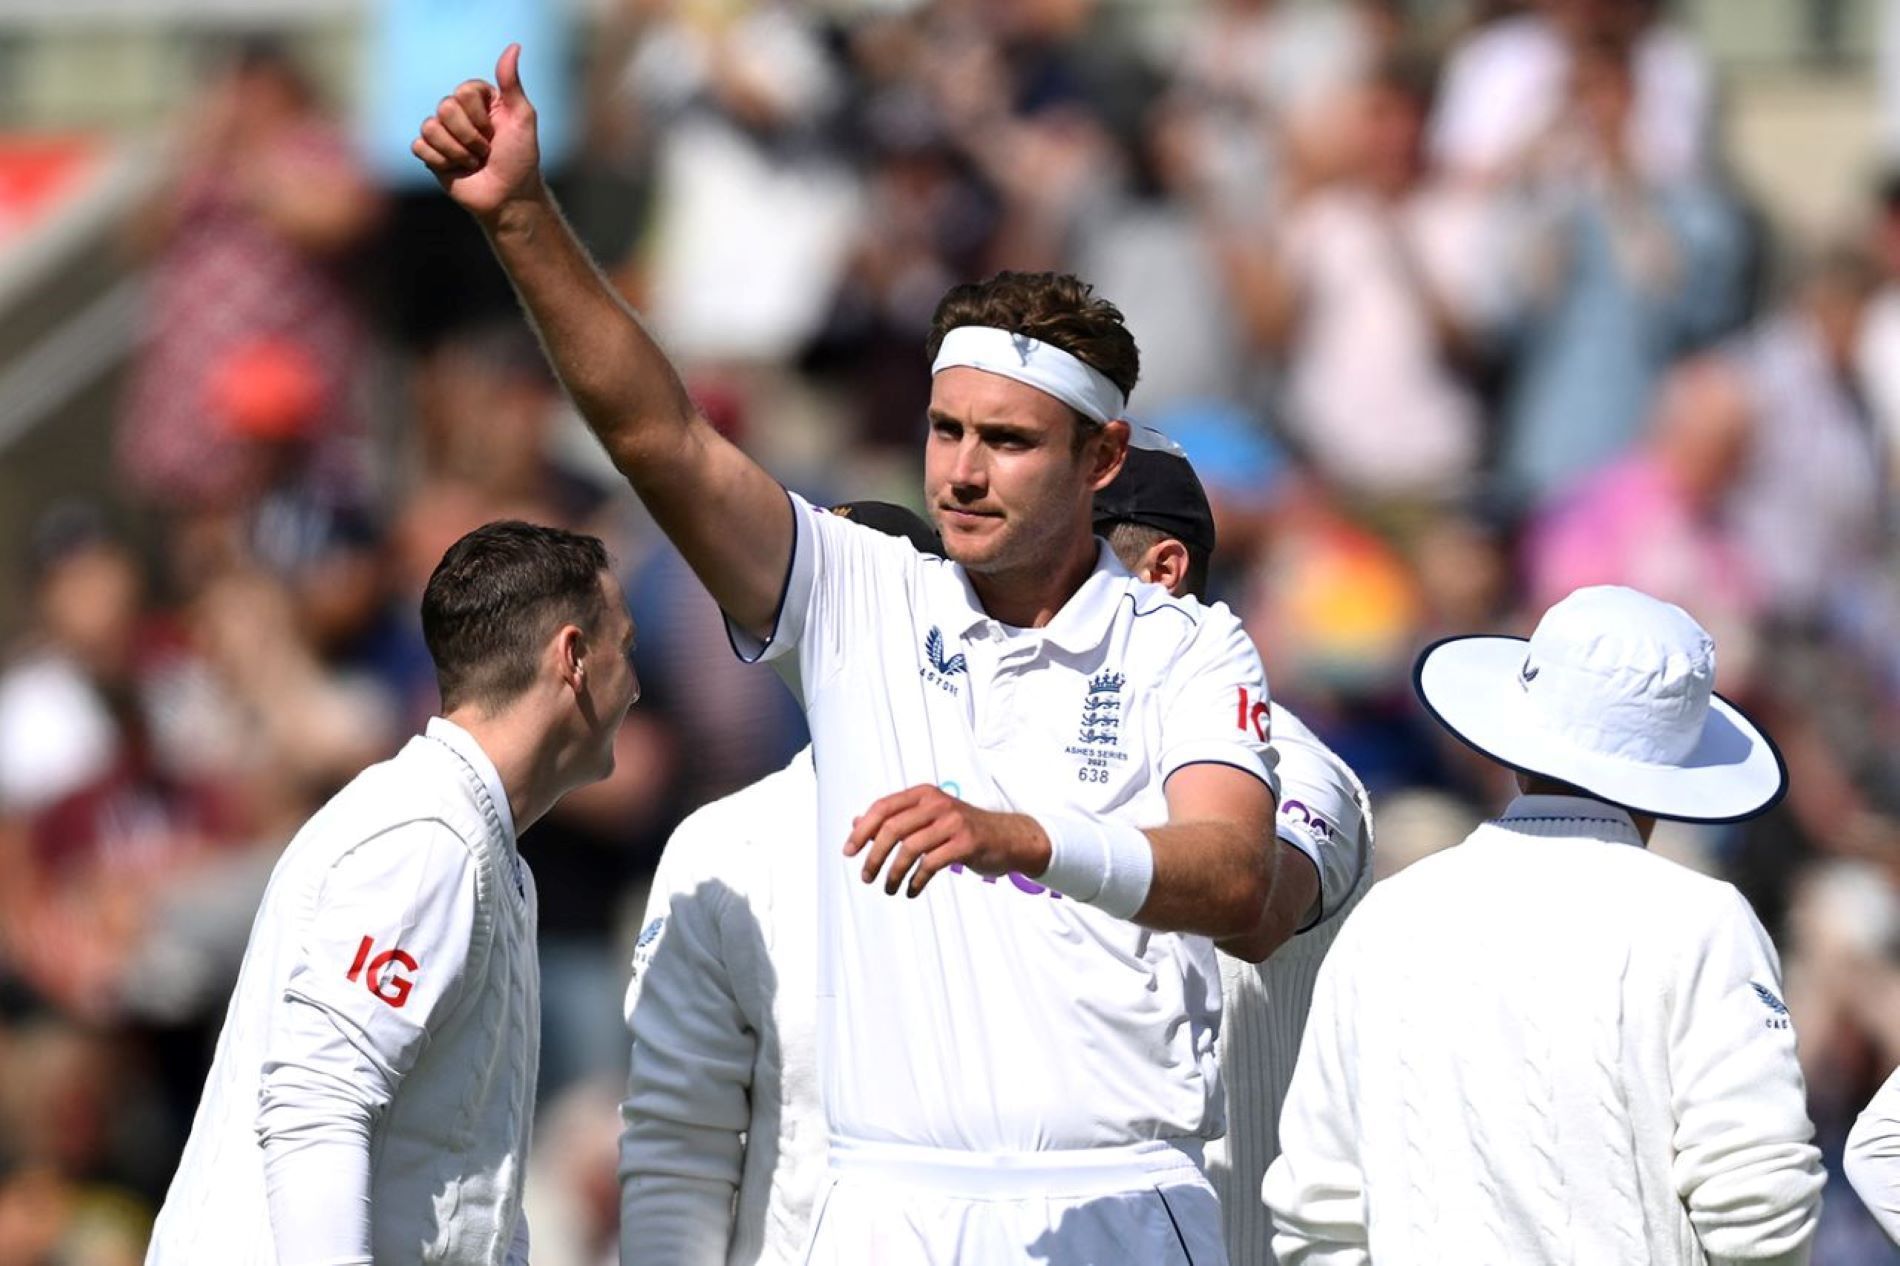 Broad reached the 600-wicket mark on the final session of Day 1